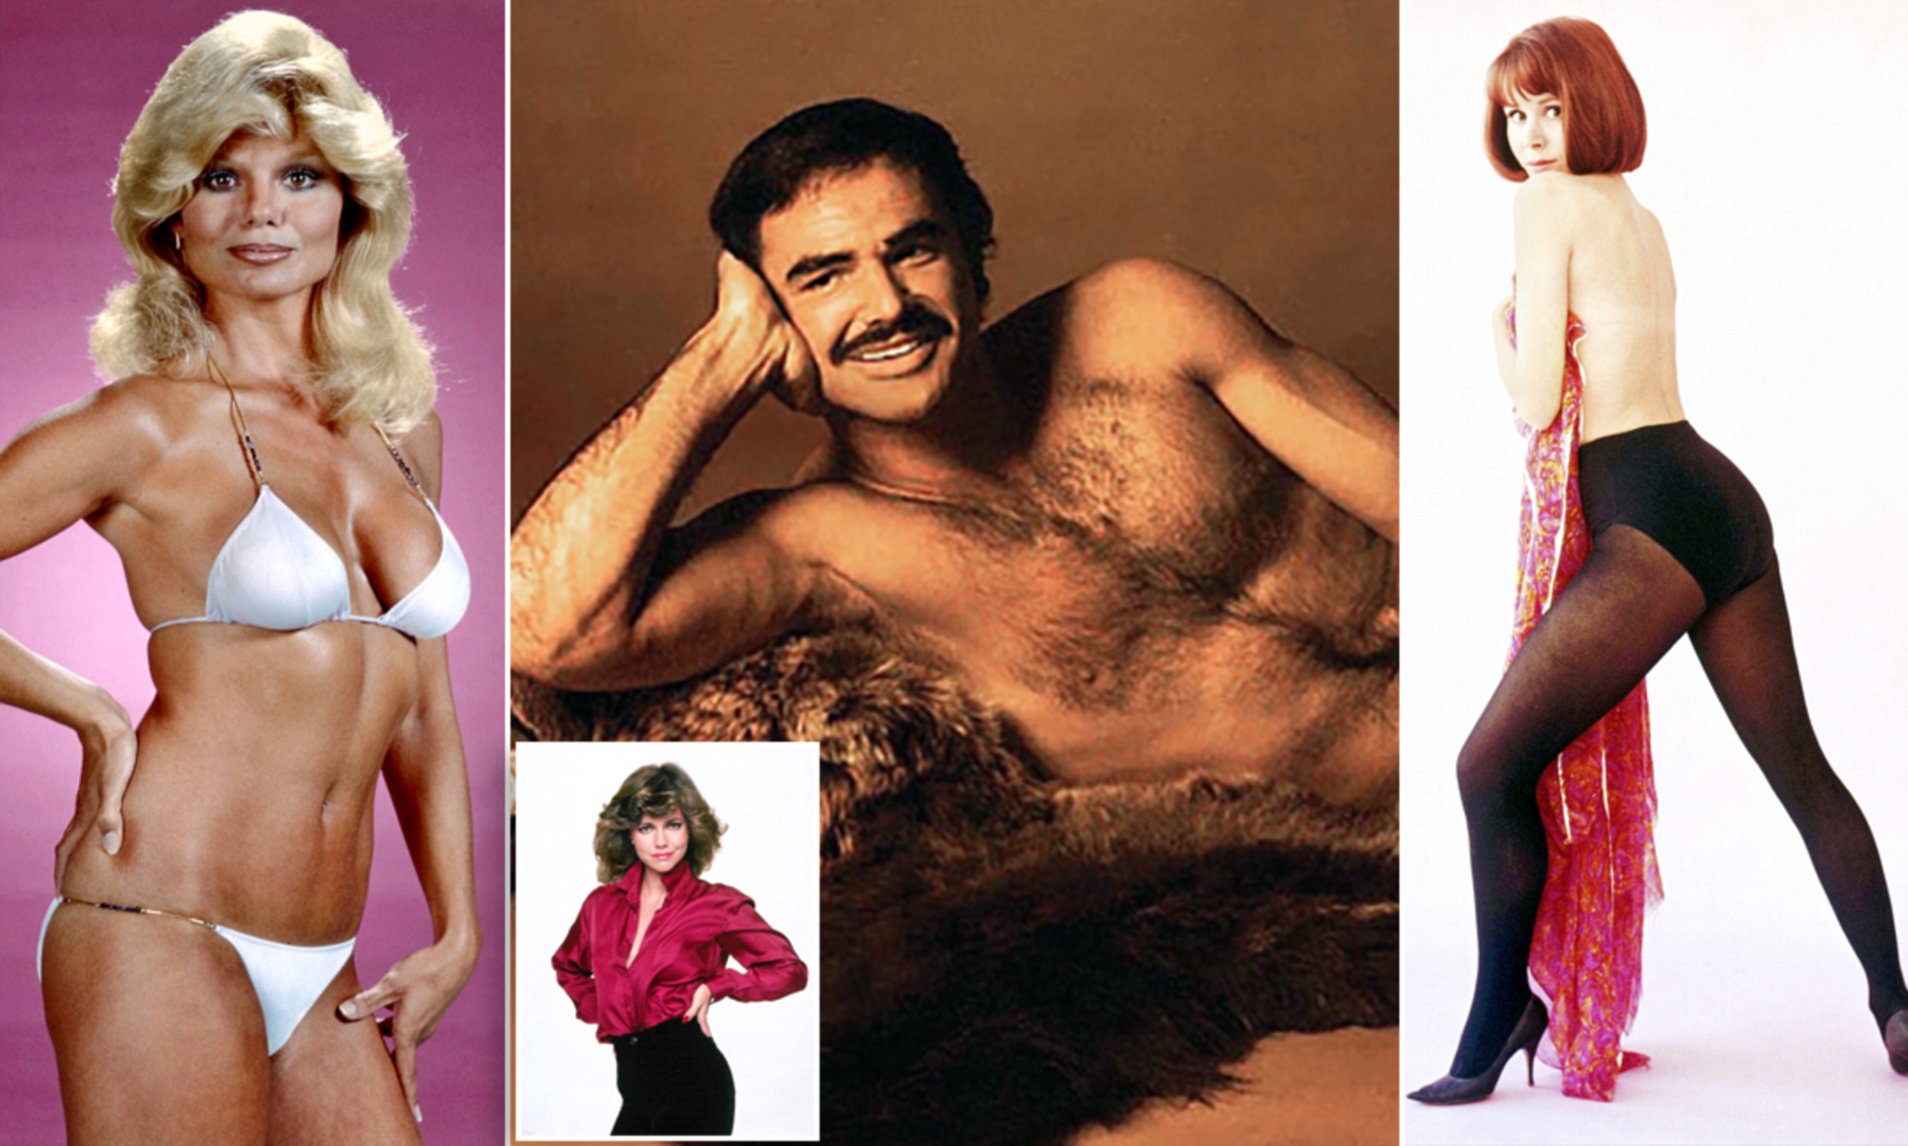 doug croghan recommends Loni Anderson Nude Photos